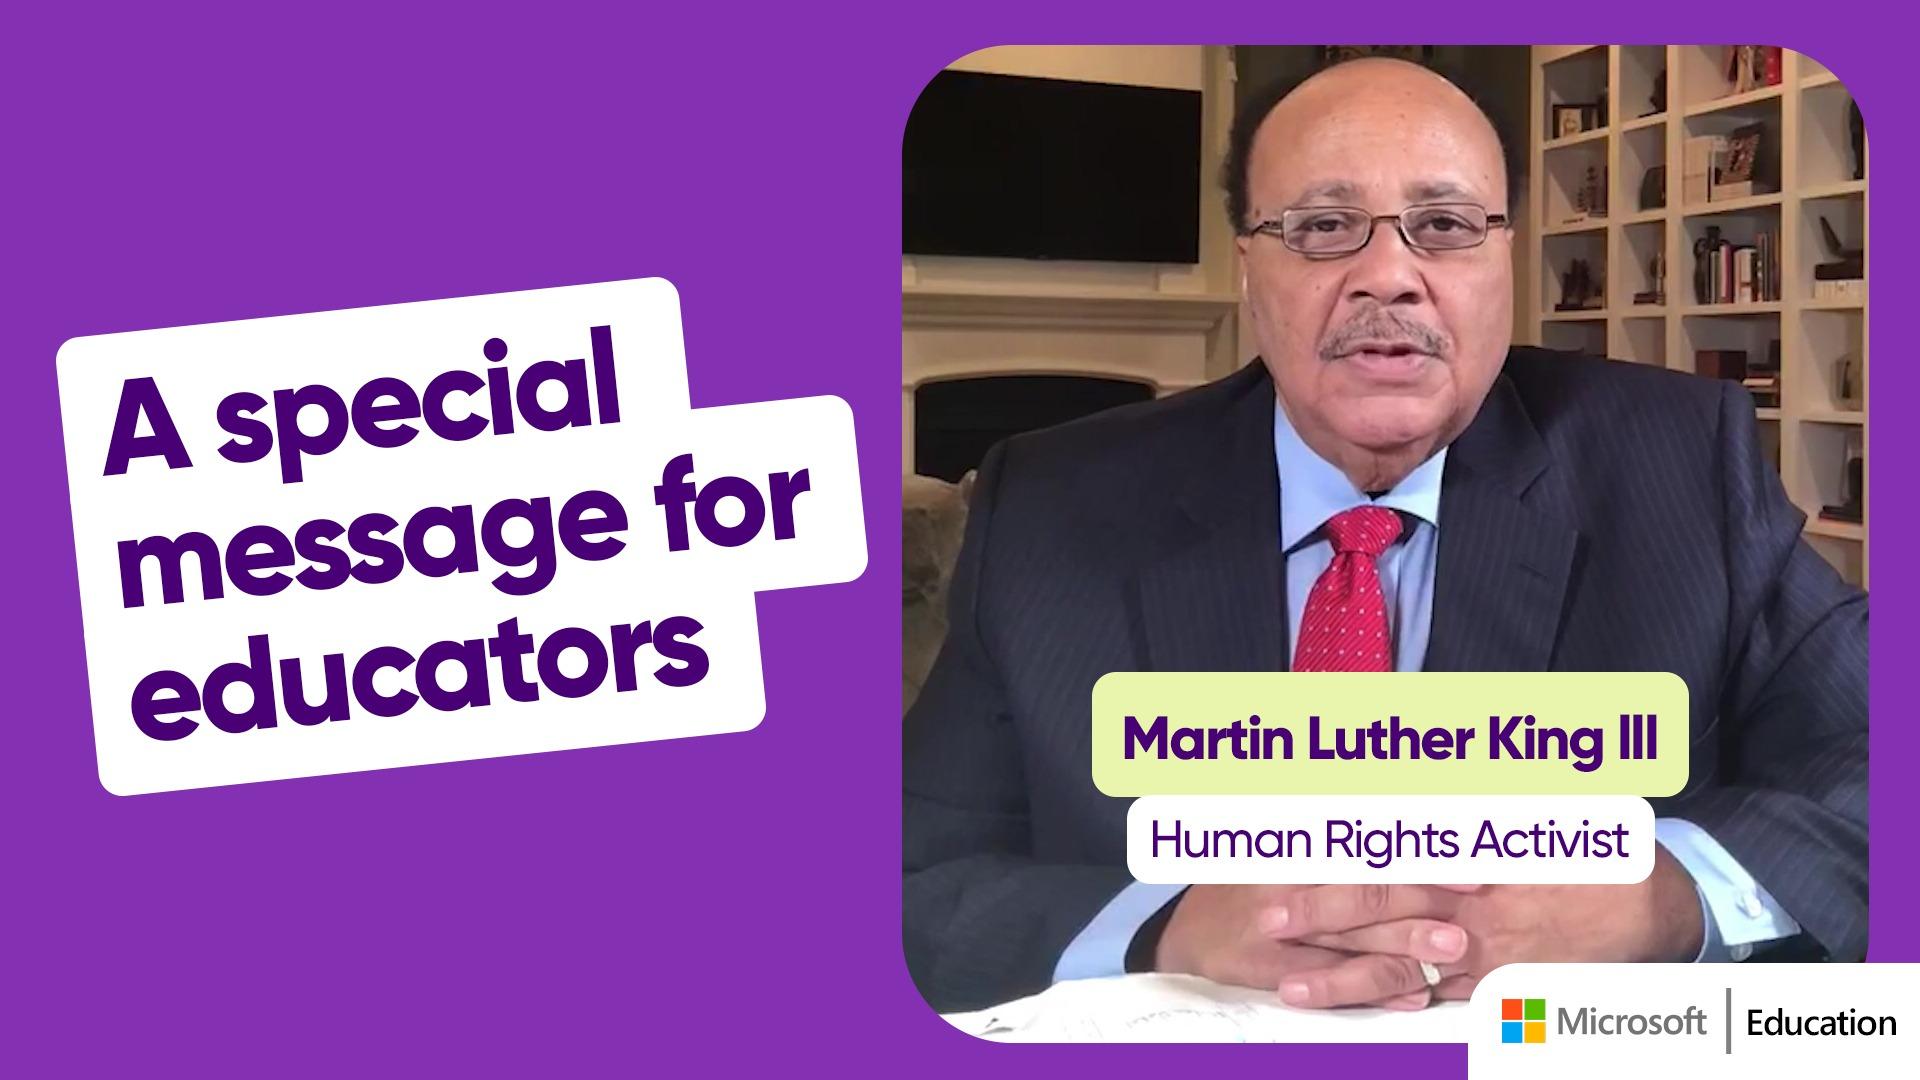 A special message for educators from Martin Luther King III